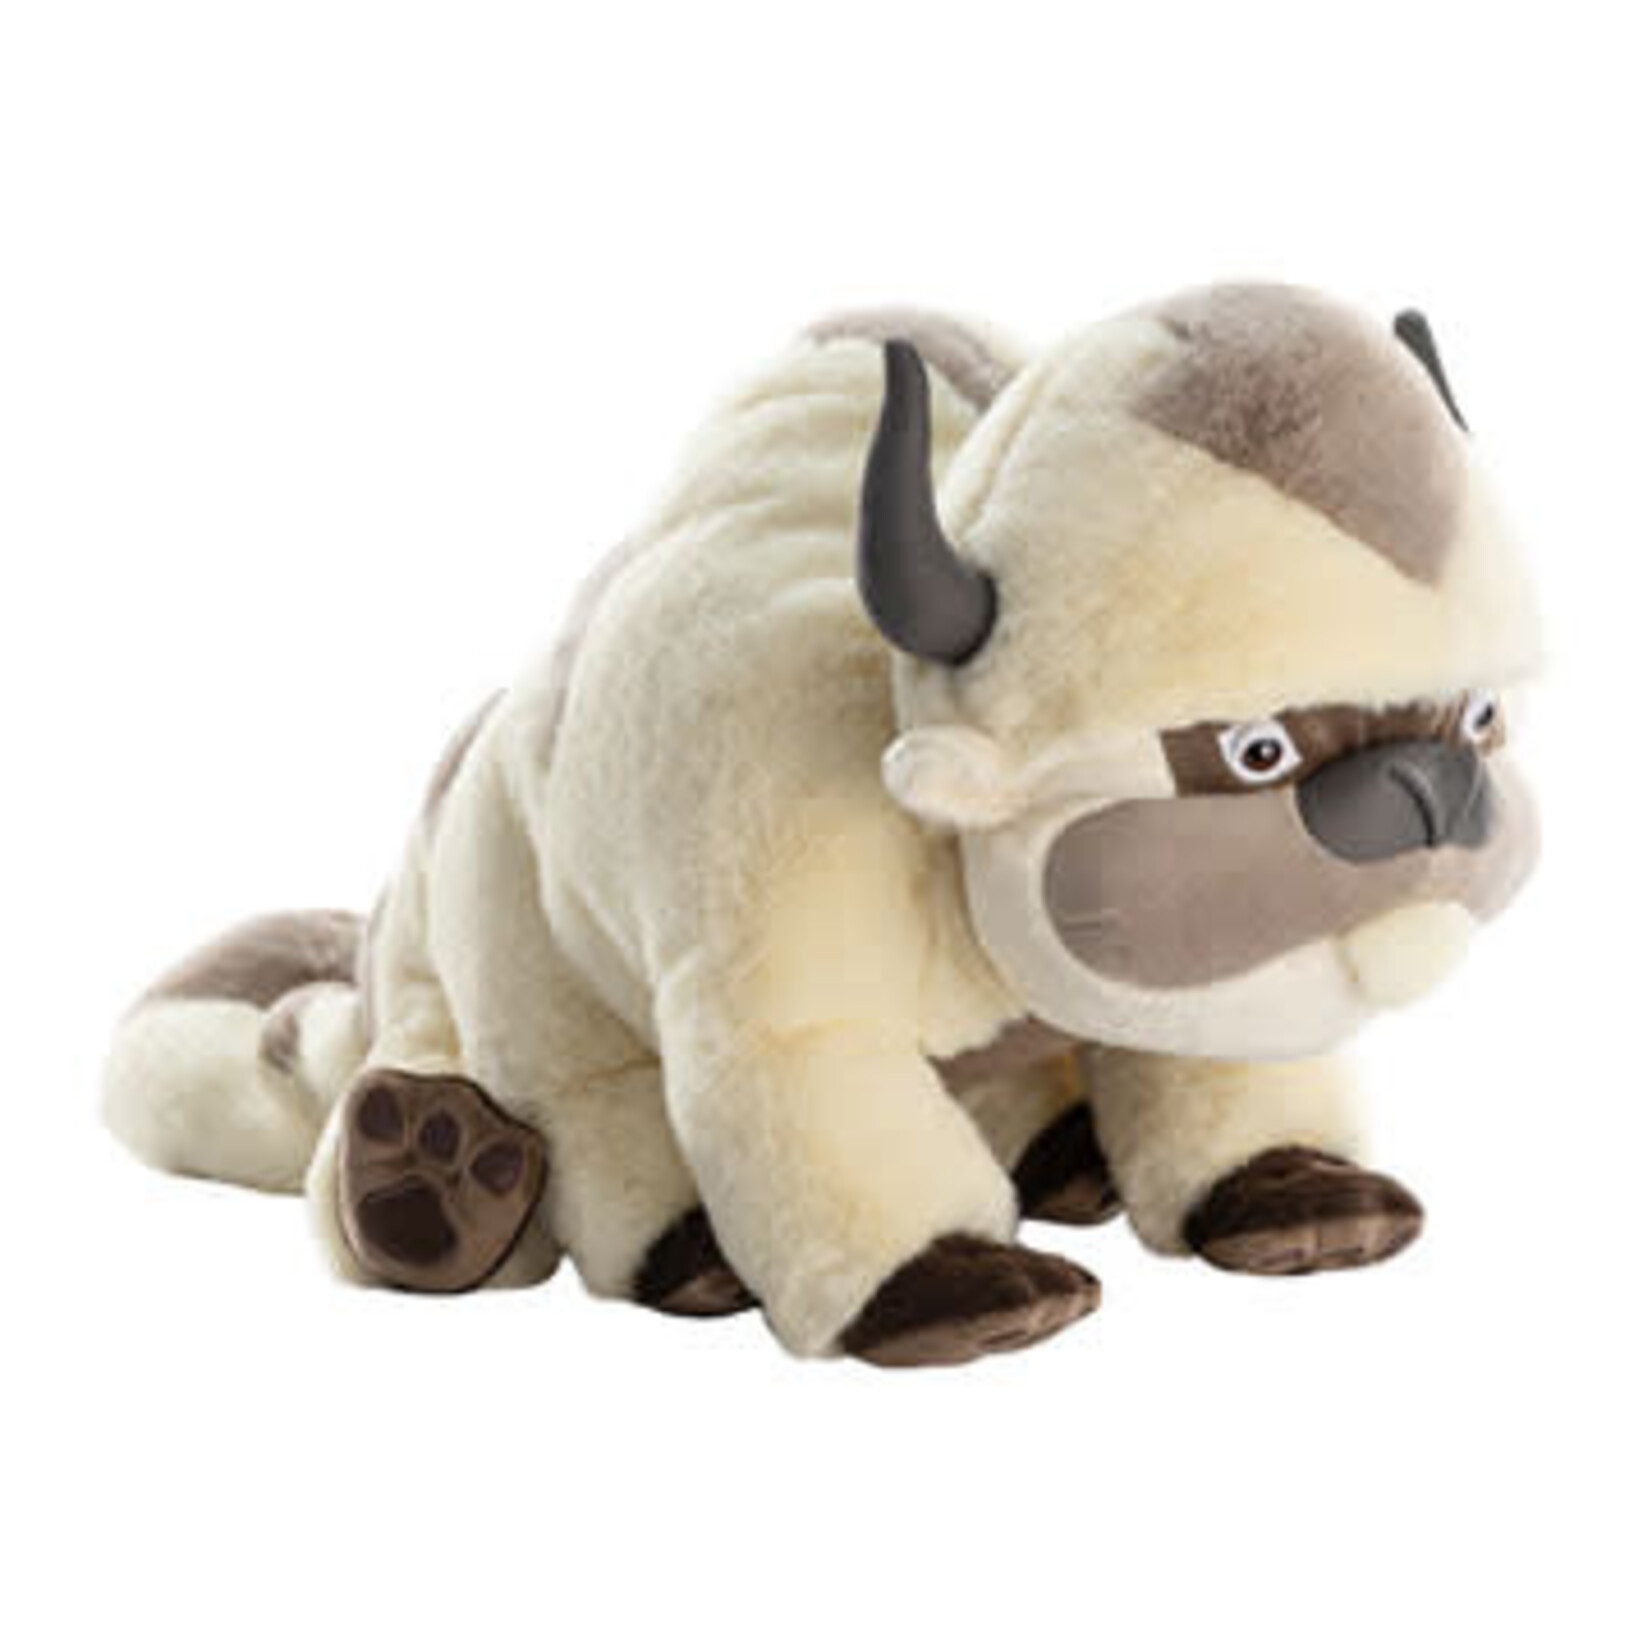 The Noble Collection Appa Plush - Avatar The Last Airbender